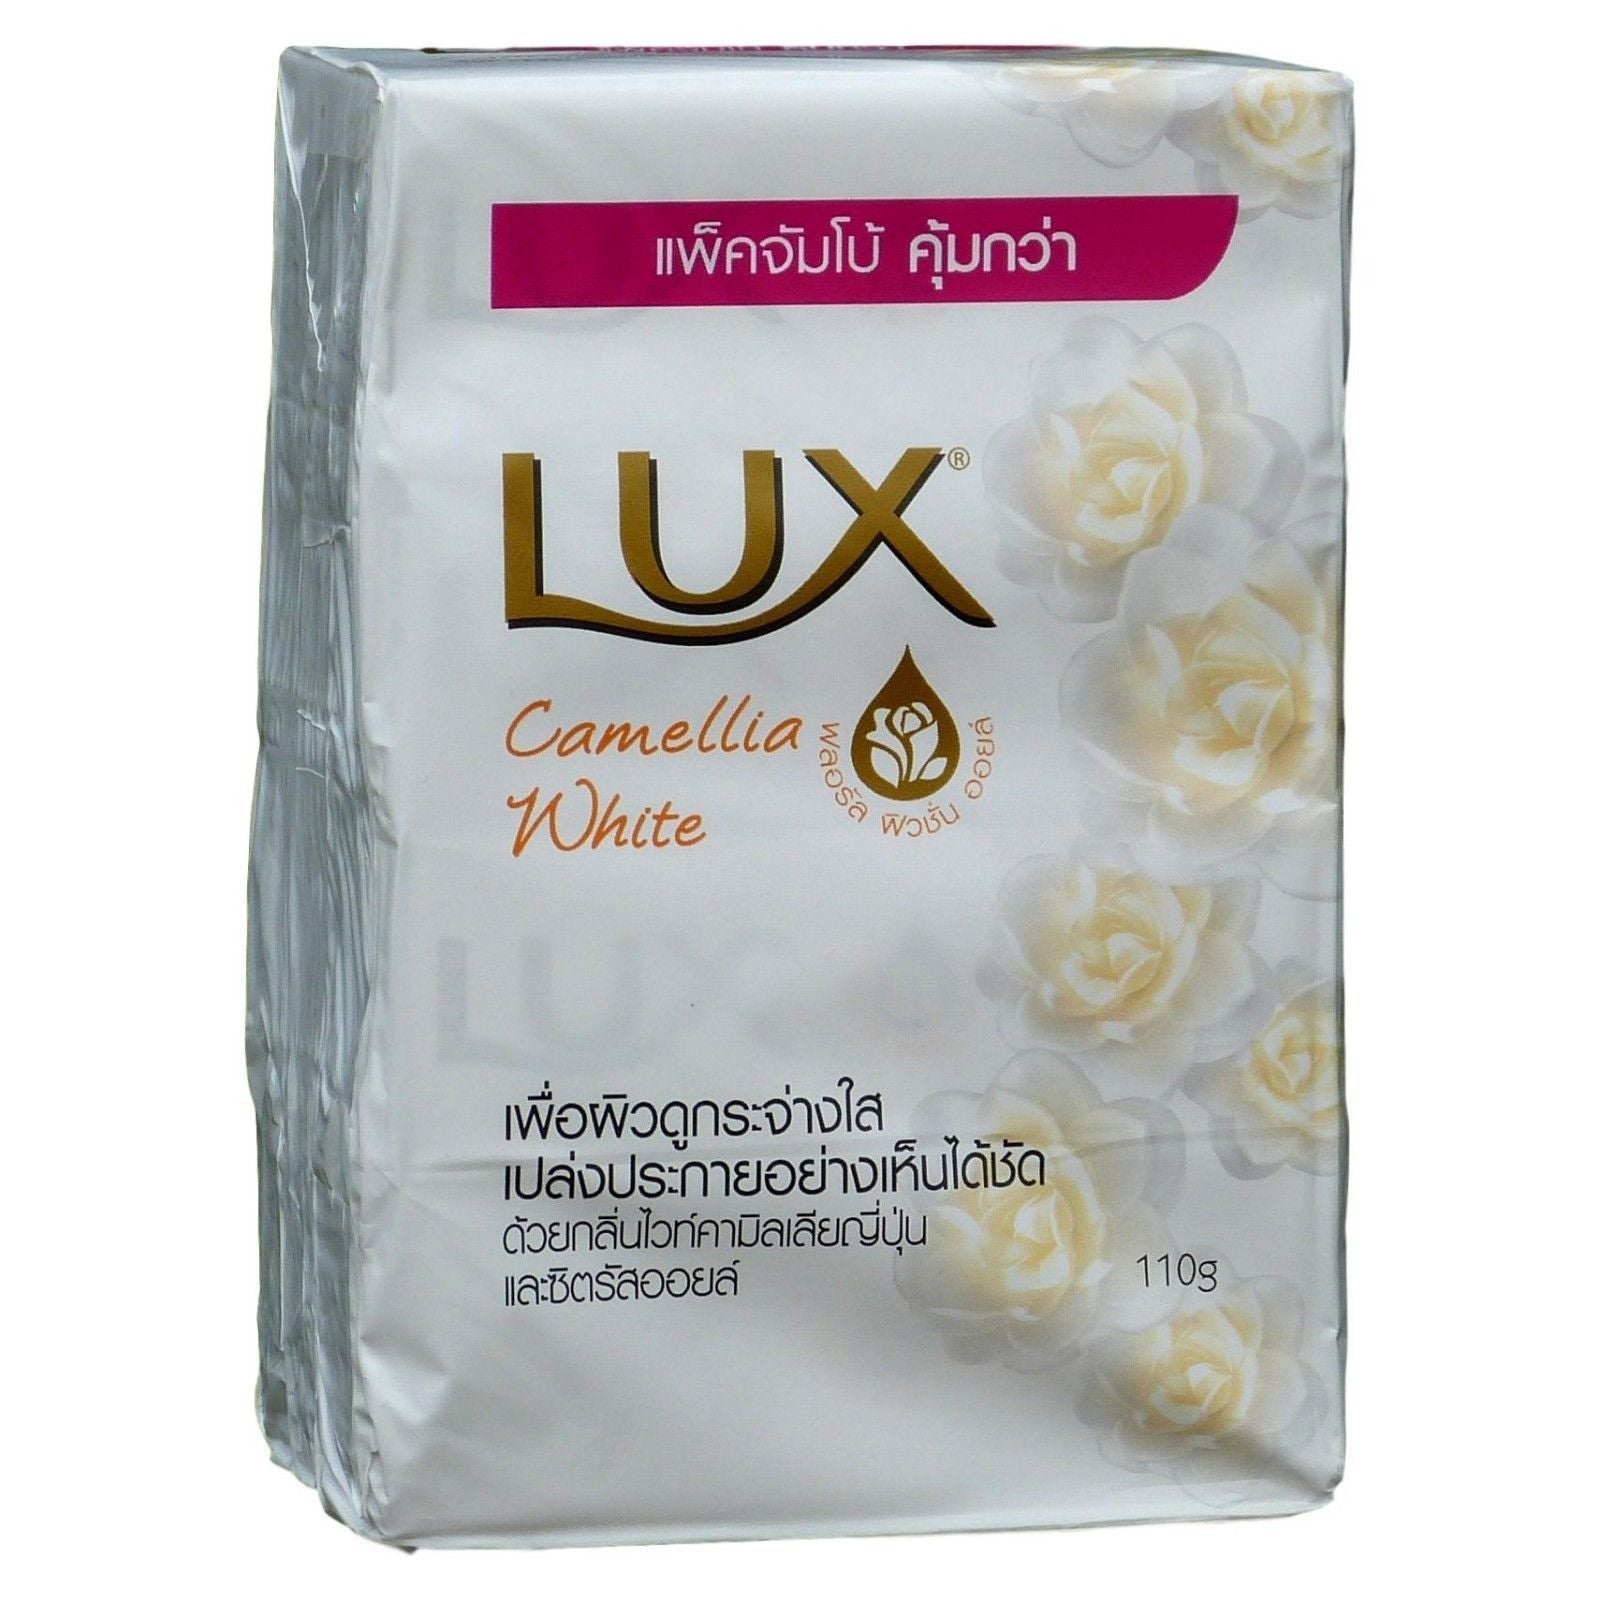 Lux Camellia White Skin Whitening Exfoliating Bar Soap 110 grams Pack of 4 - Asian Beauty Supply